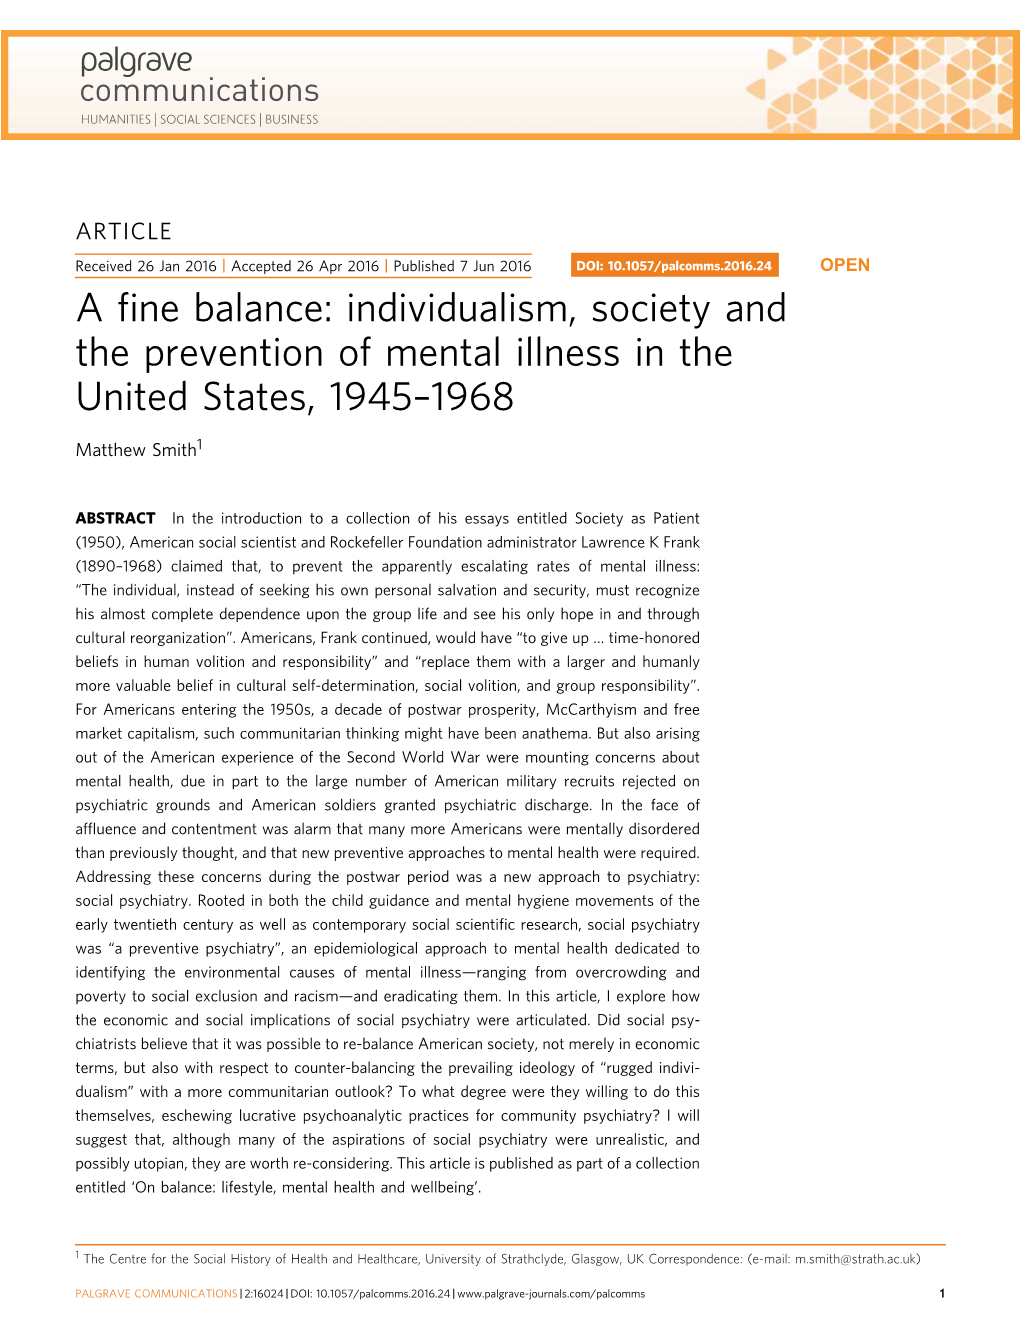 Individualism, Society and the Prevention of Mental Illness in the United States, 1945–1968